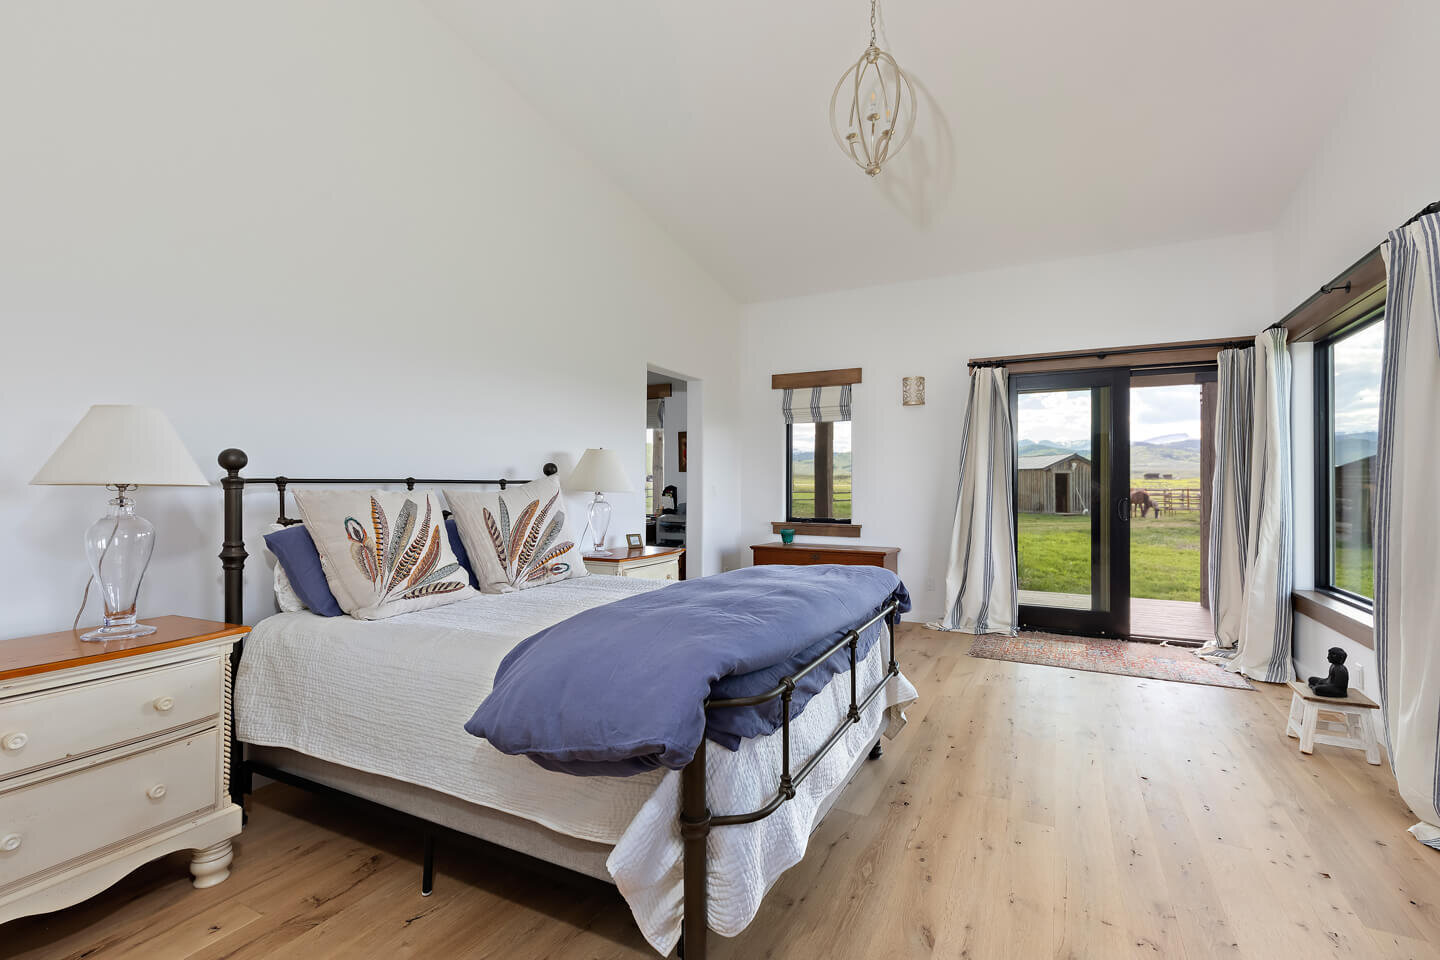 Master bedroom with view to horse corral